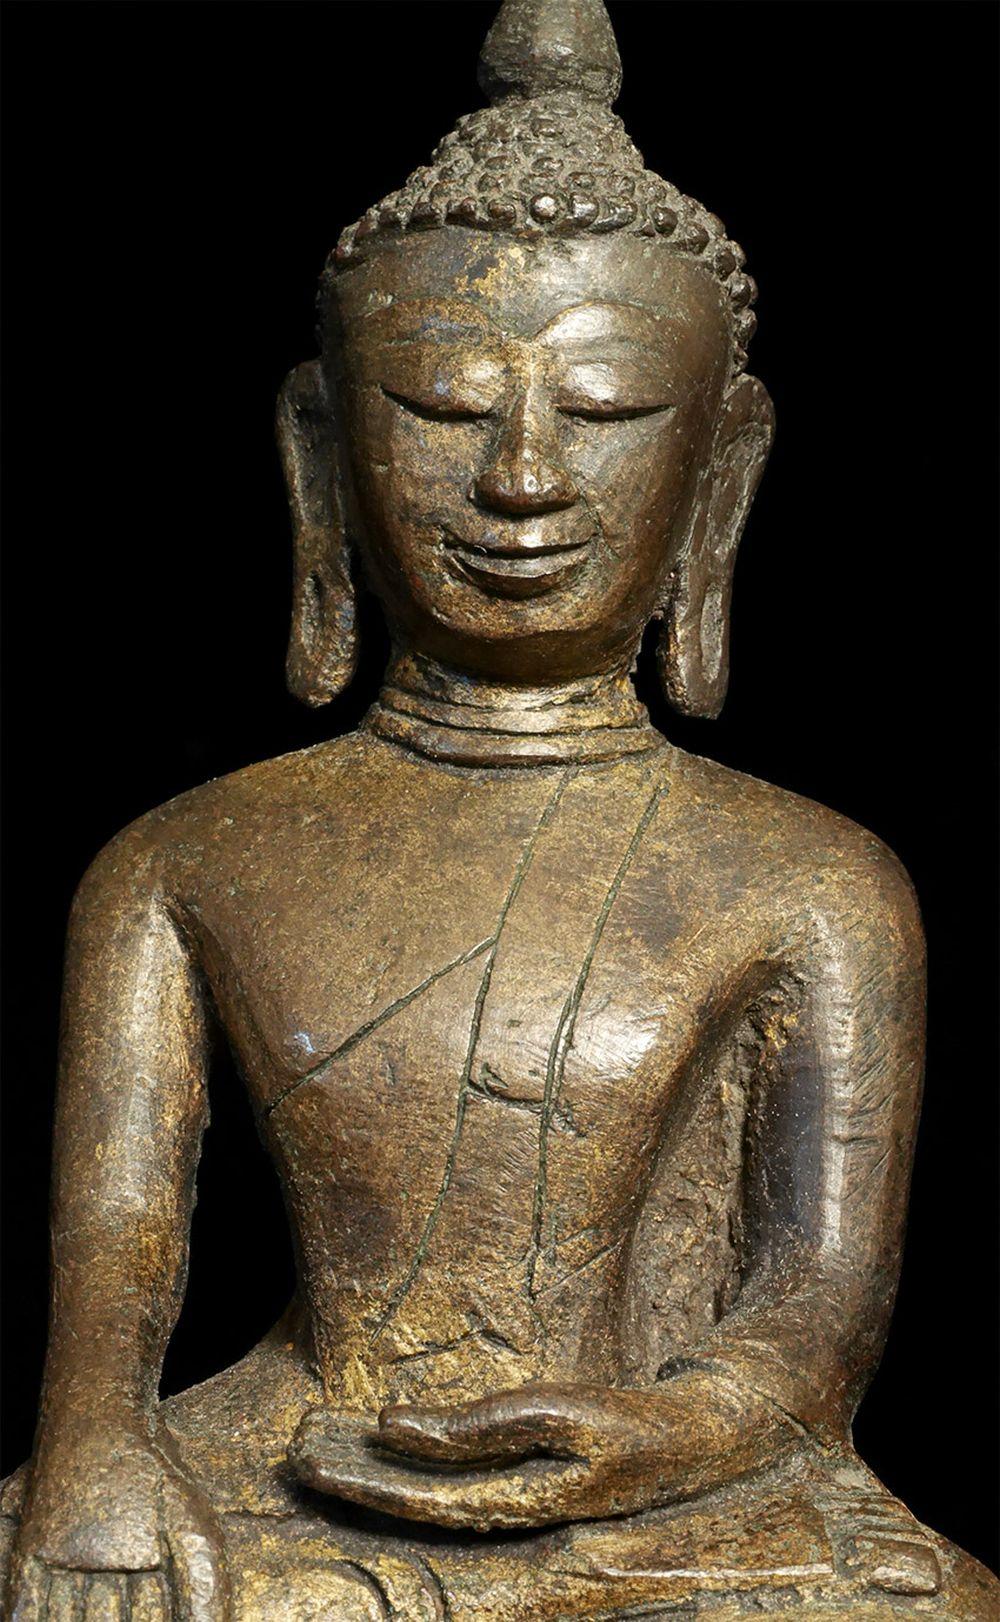 14\15thC Burmese Pinya style- a very rare type of Burmese Buddha which is from after the Pagan period, and contemporary with the early Ava period. There are still clear echoes of Pagan. Of the extremely few of this style around, this is an